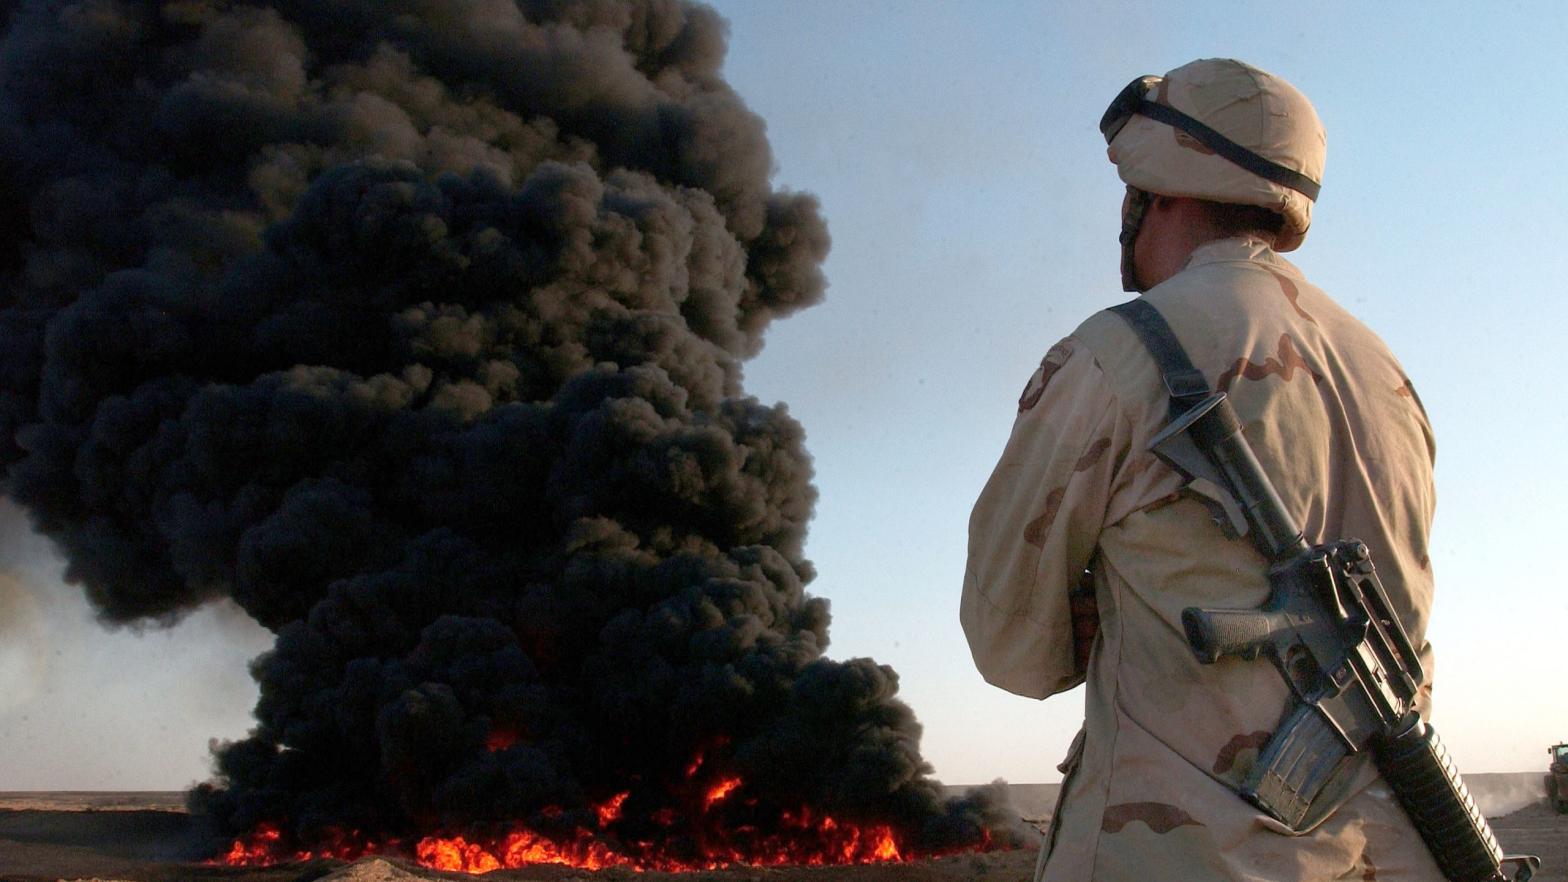 A giant black cloud of burning oil rises behind a U.S. Army soldier in August 2003. (Photo: Scott Nelson, Getty Images)